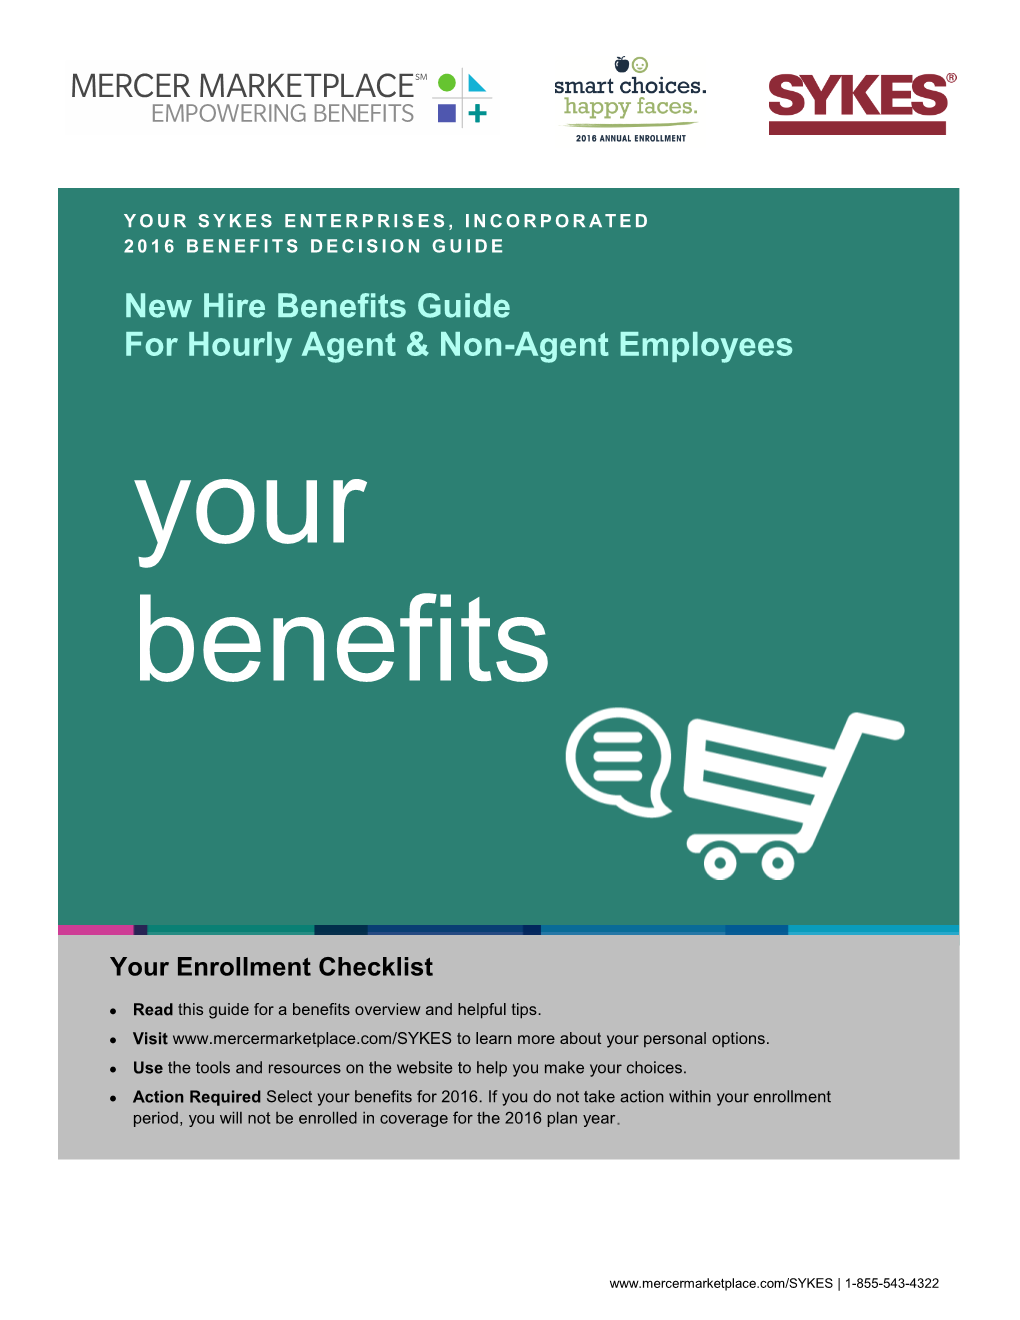 New Hire Benefits Guide for Hourly Agent & Non-Agent Employees